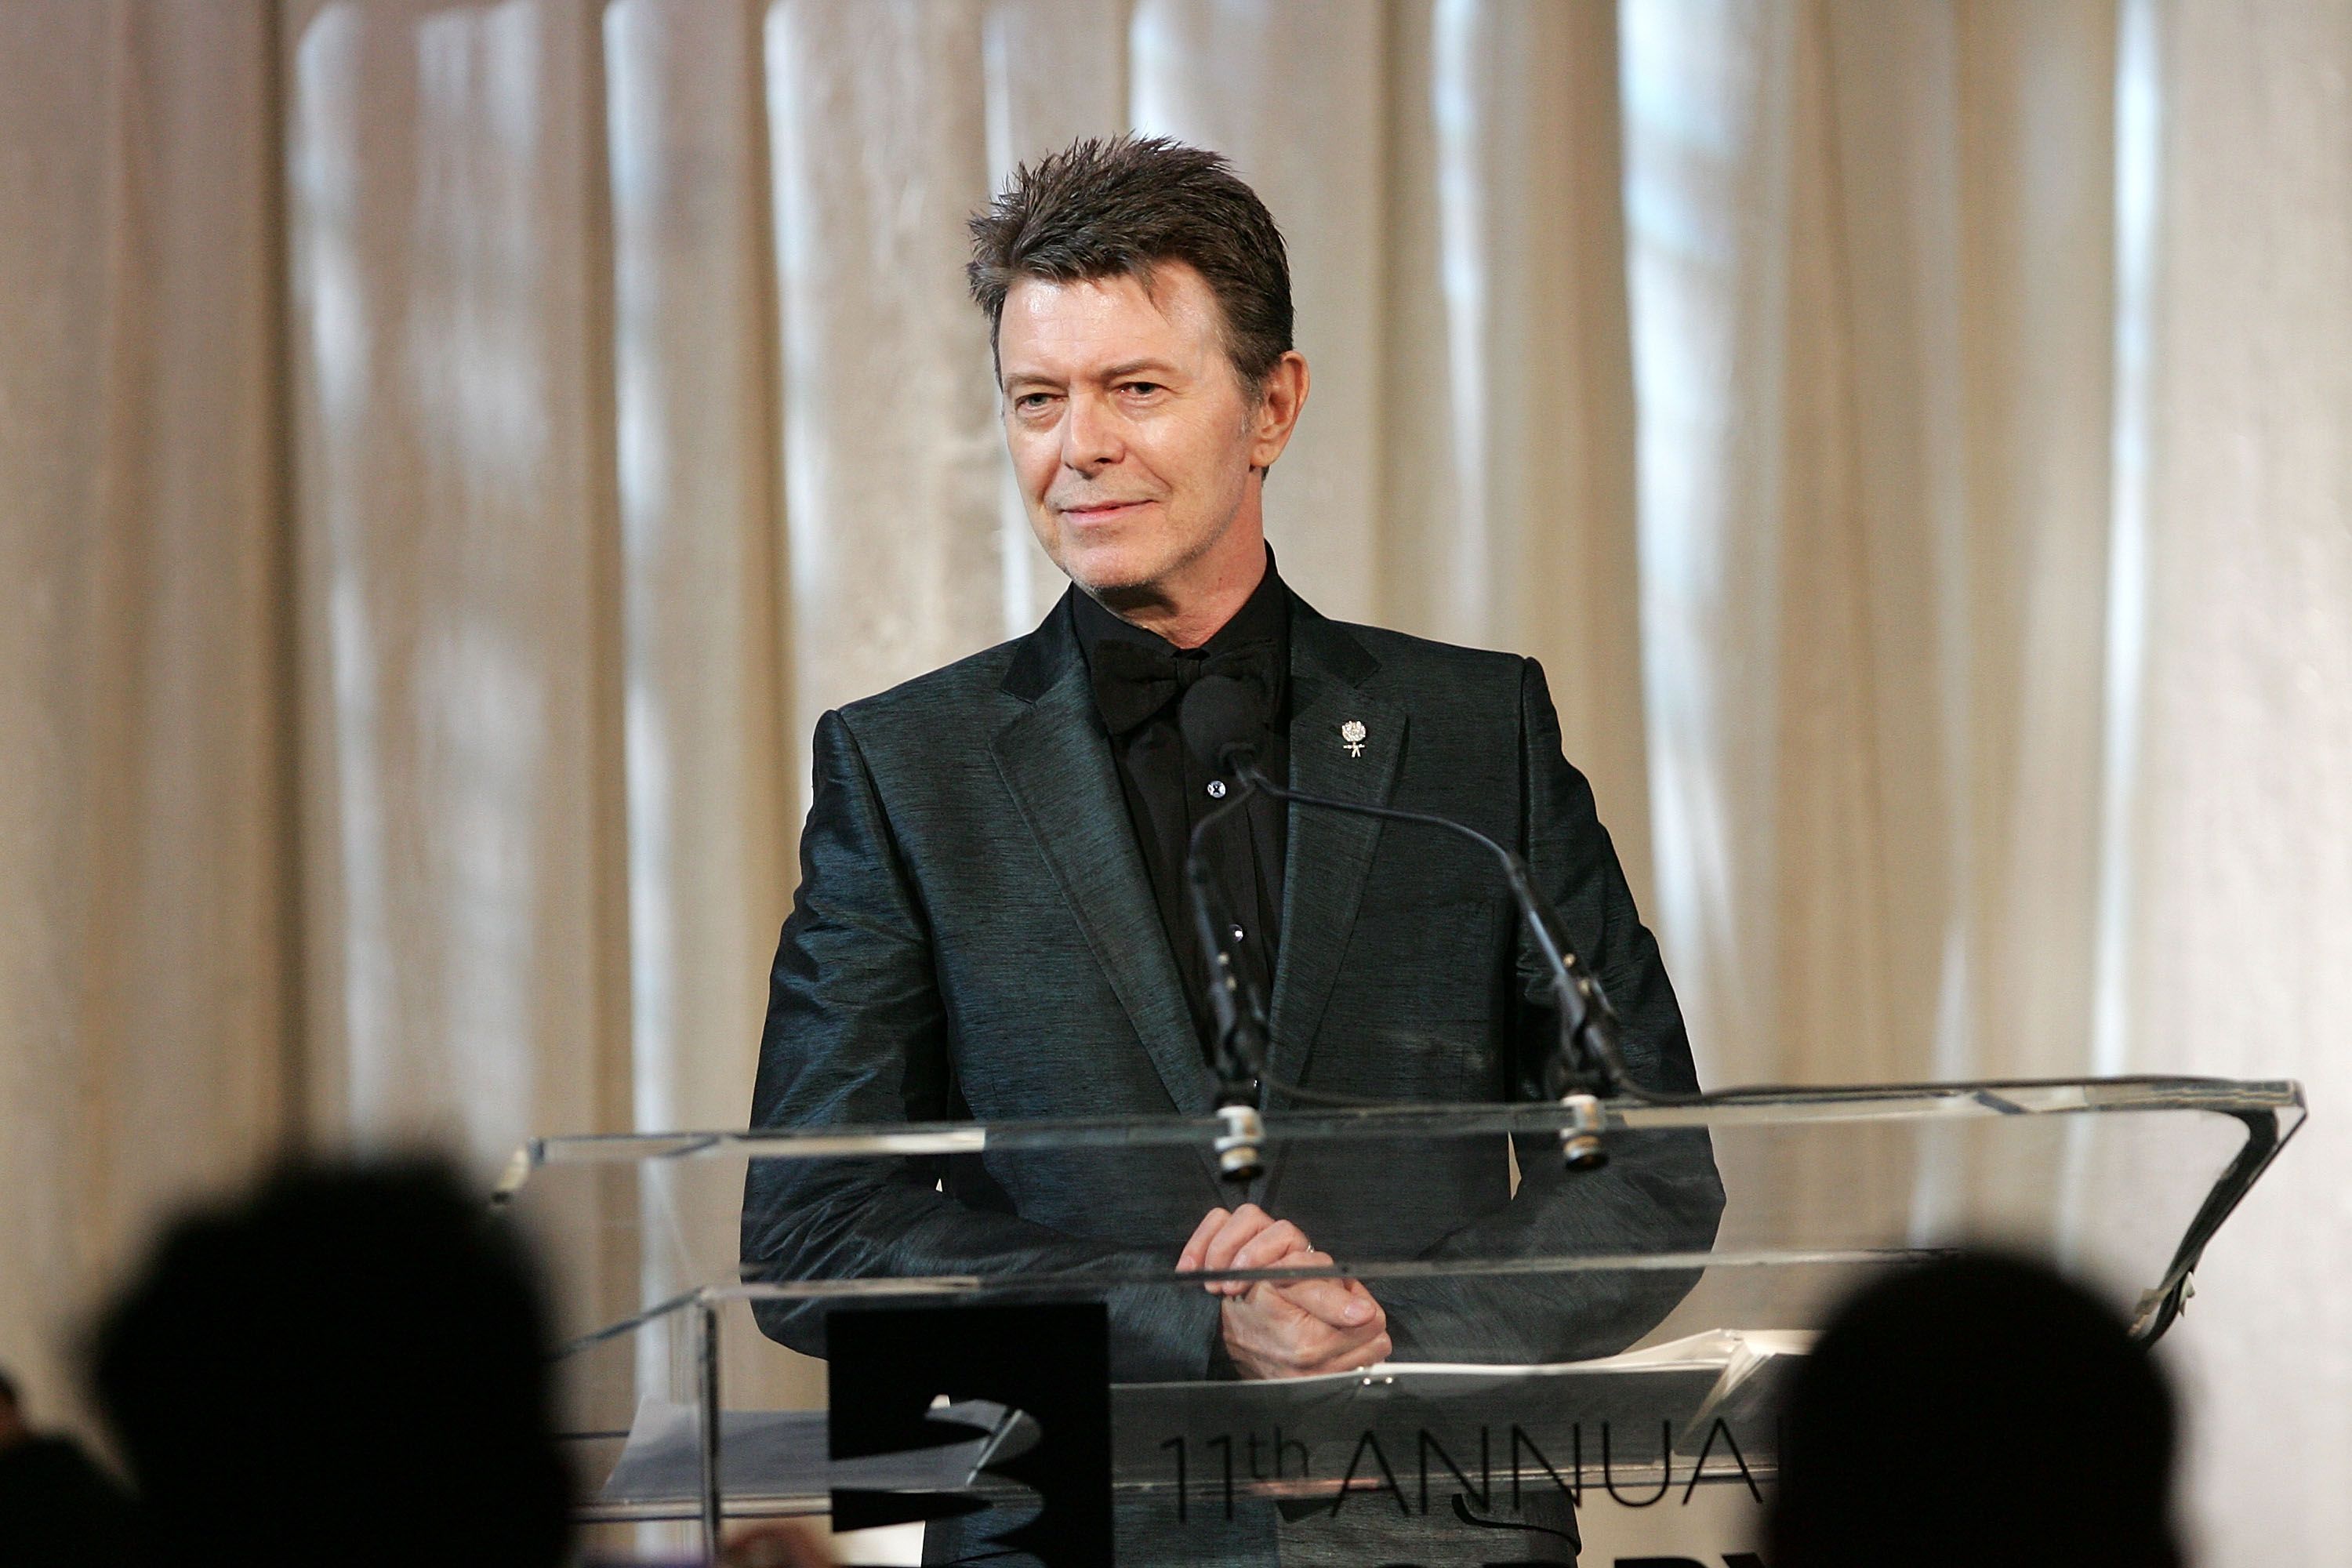 David Bowie accepting the Webby Lifetime Achievement award on June 5, 2007 in New York City. | Photo: Getty Images